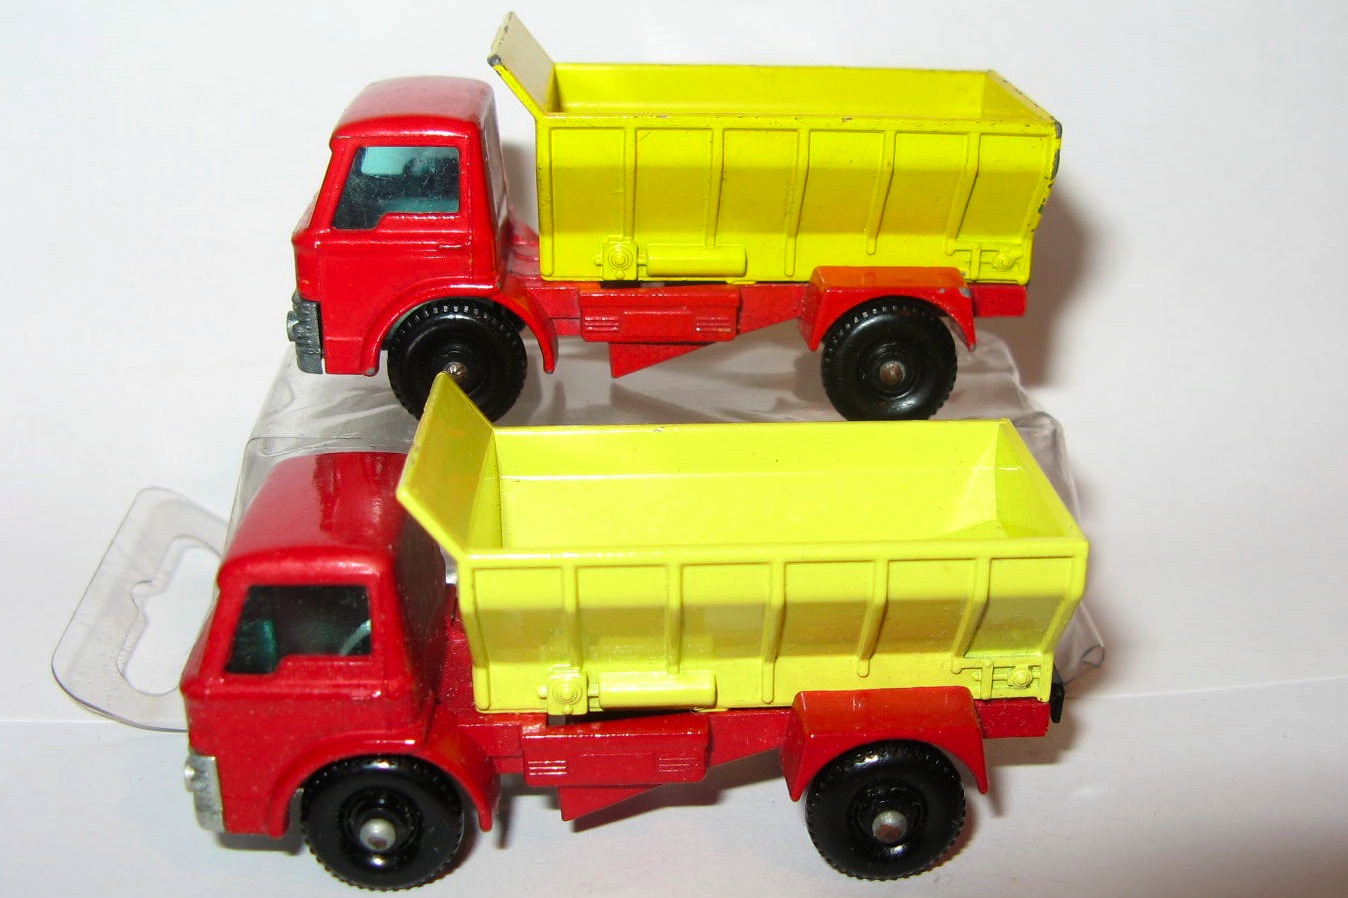 70 Bcompare Grit Spreading Truck.jpg